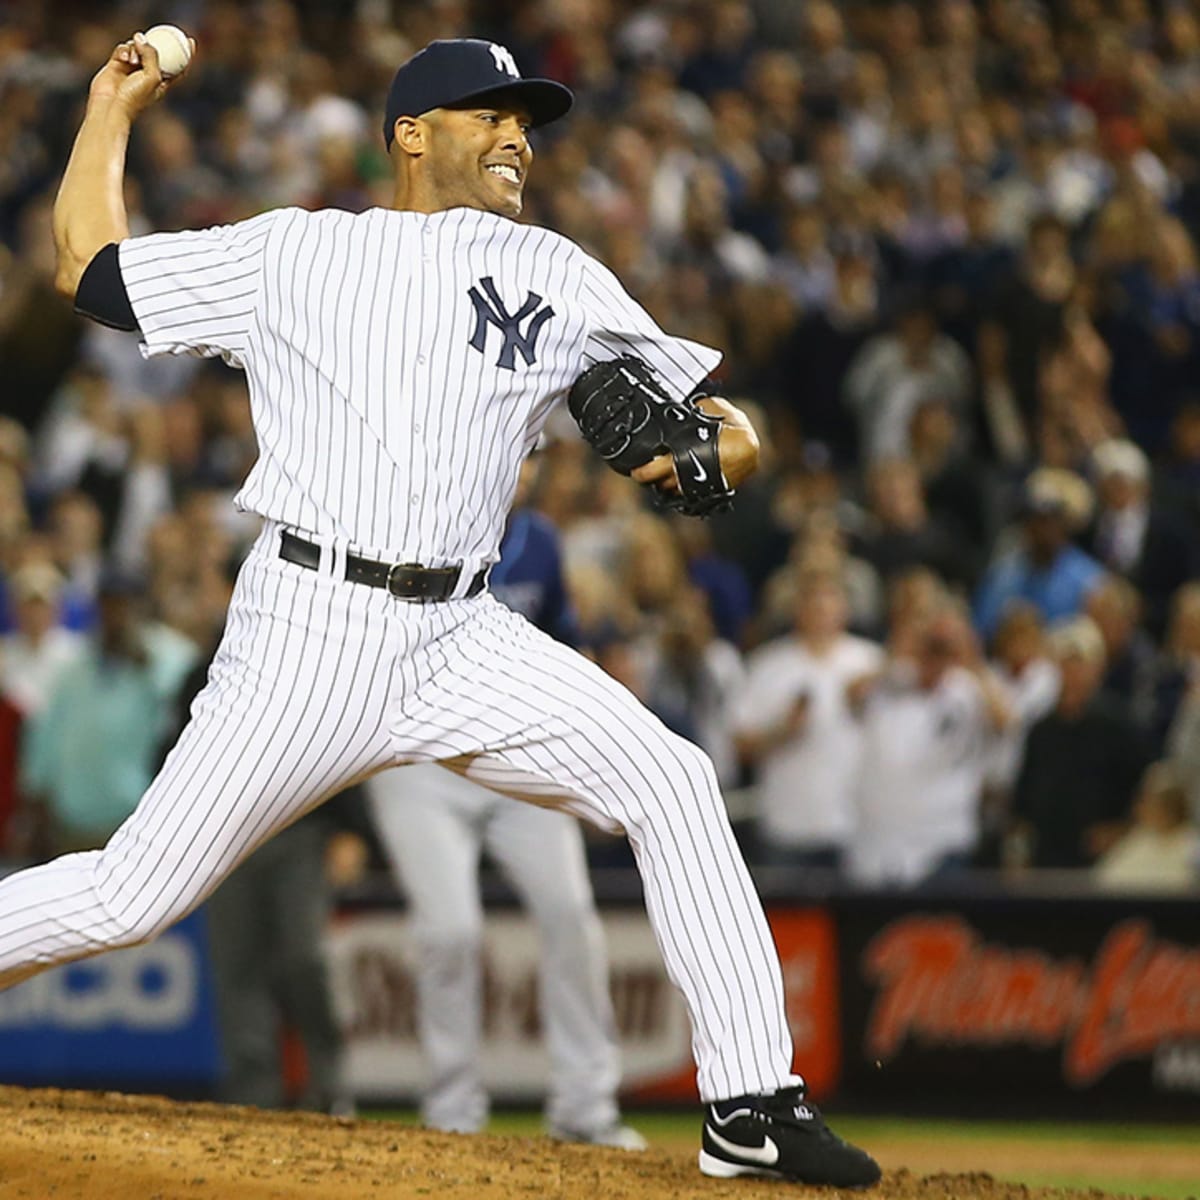 Yankees Wearing Mariano Rivera Patch Today – SportsLogos.Net News